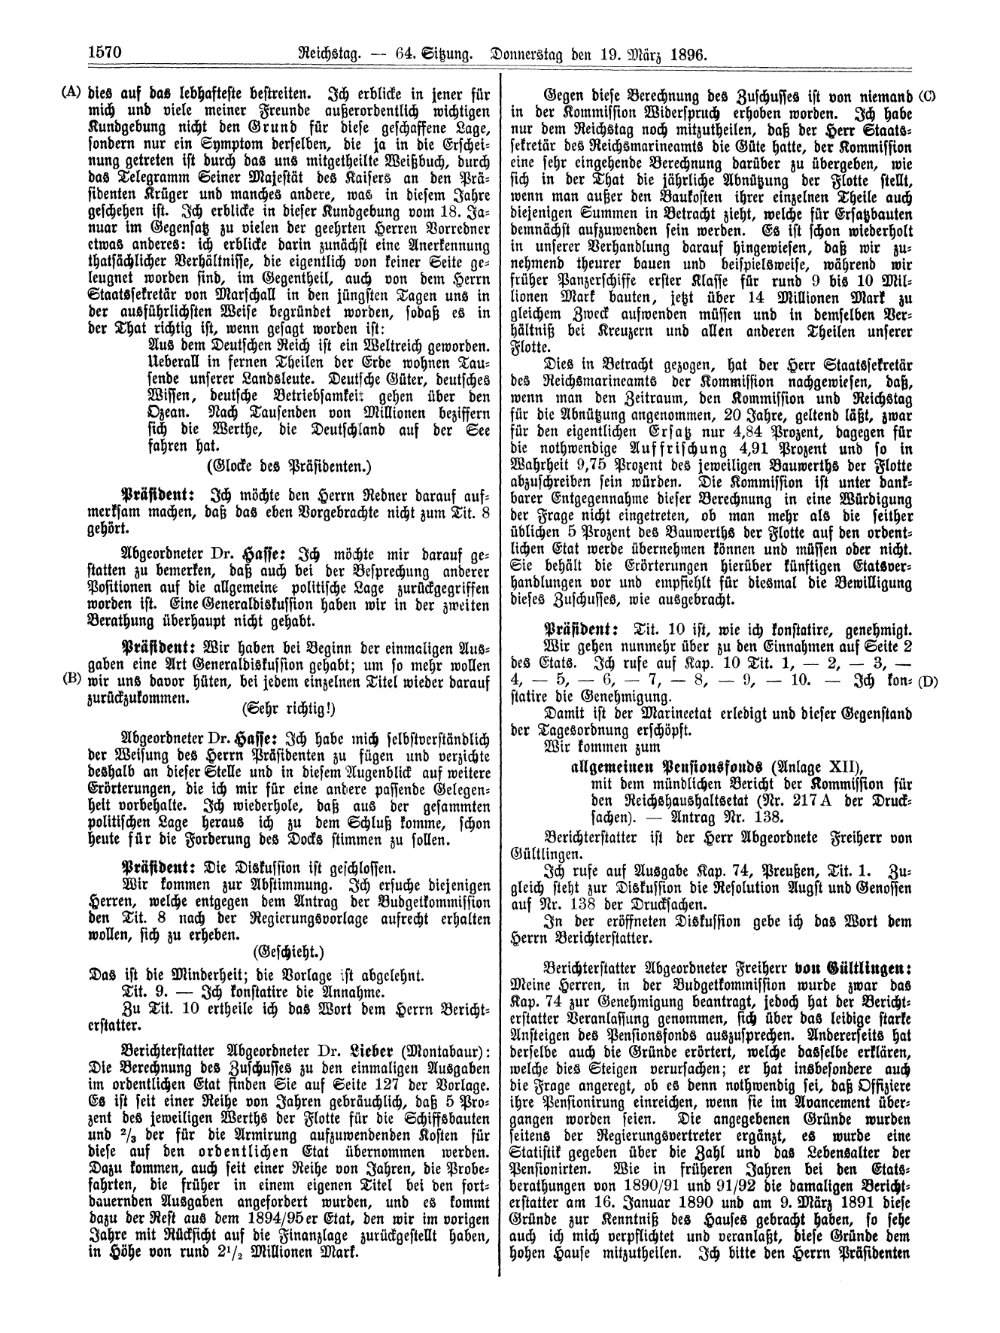 Scan of page 1570